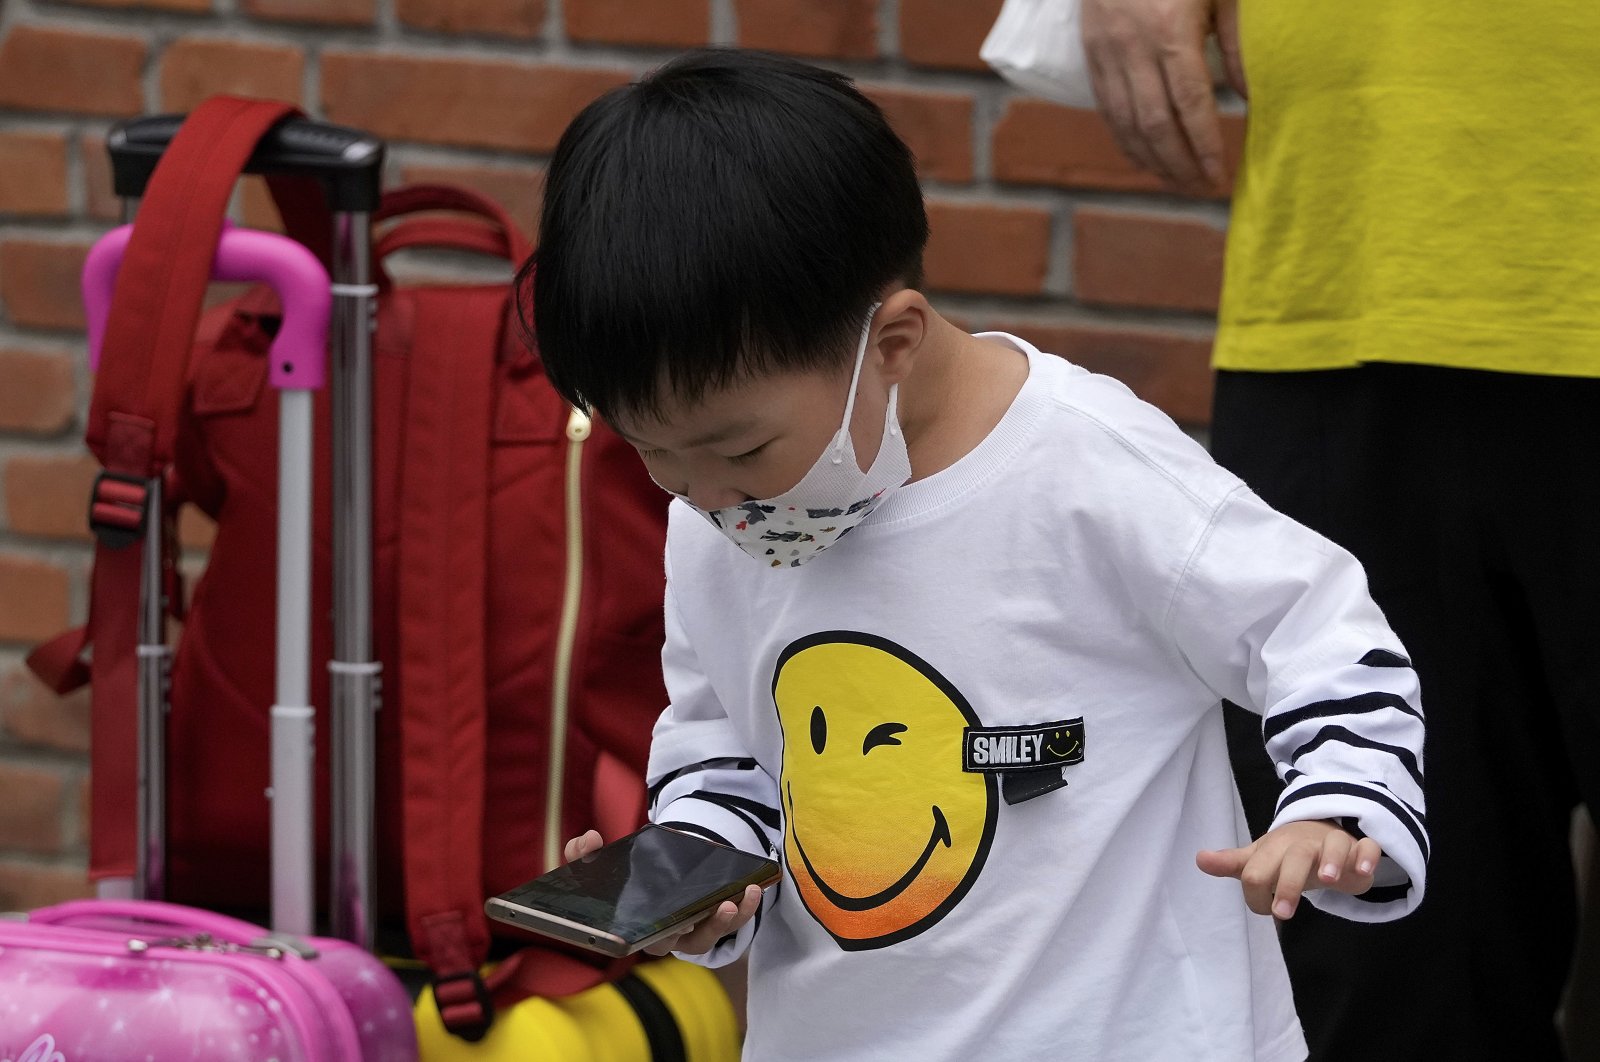 A child wearing a face mask plays a game on a smartphone next to his relative in Beijing, China, Sept. 12, 2021. (AP Photo)